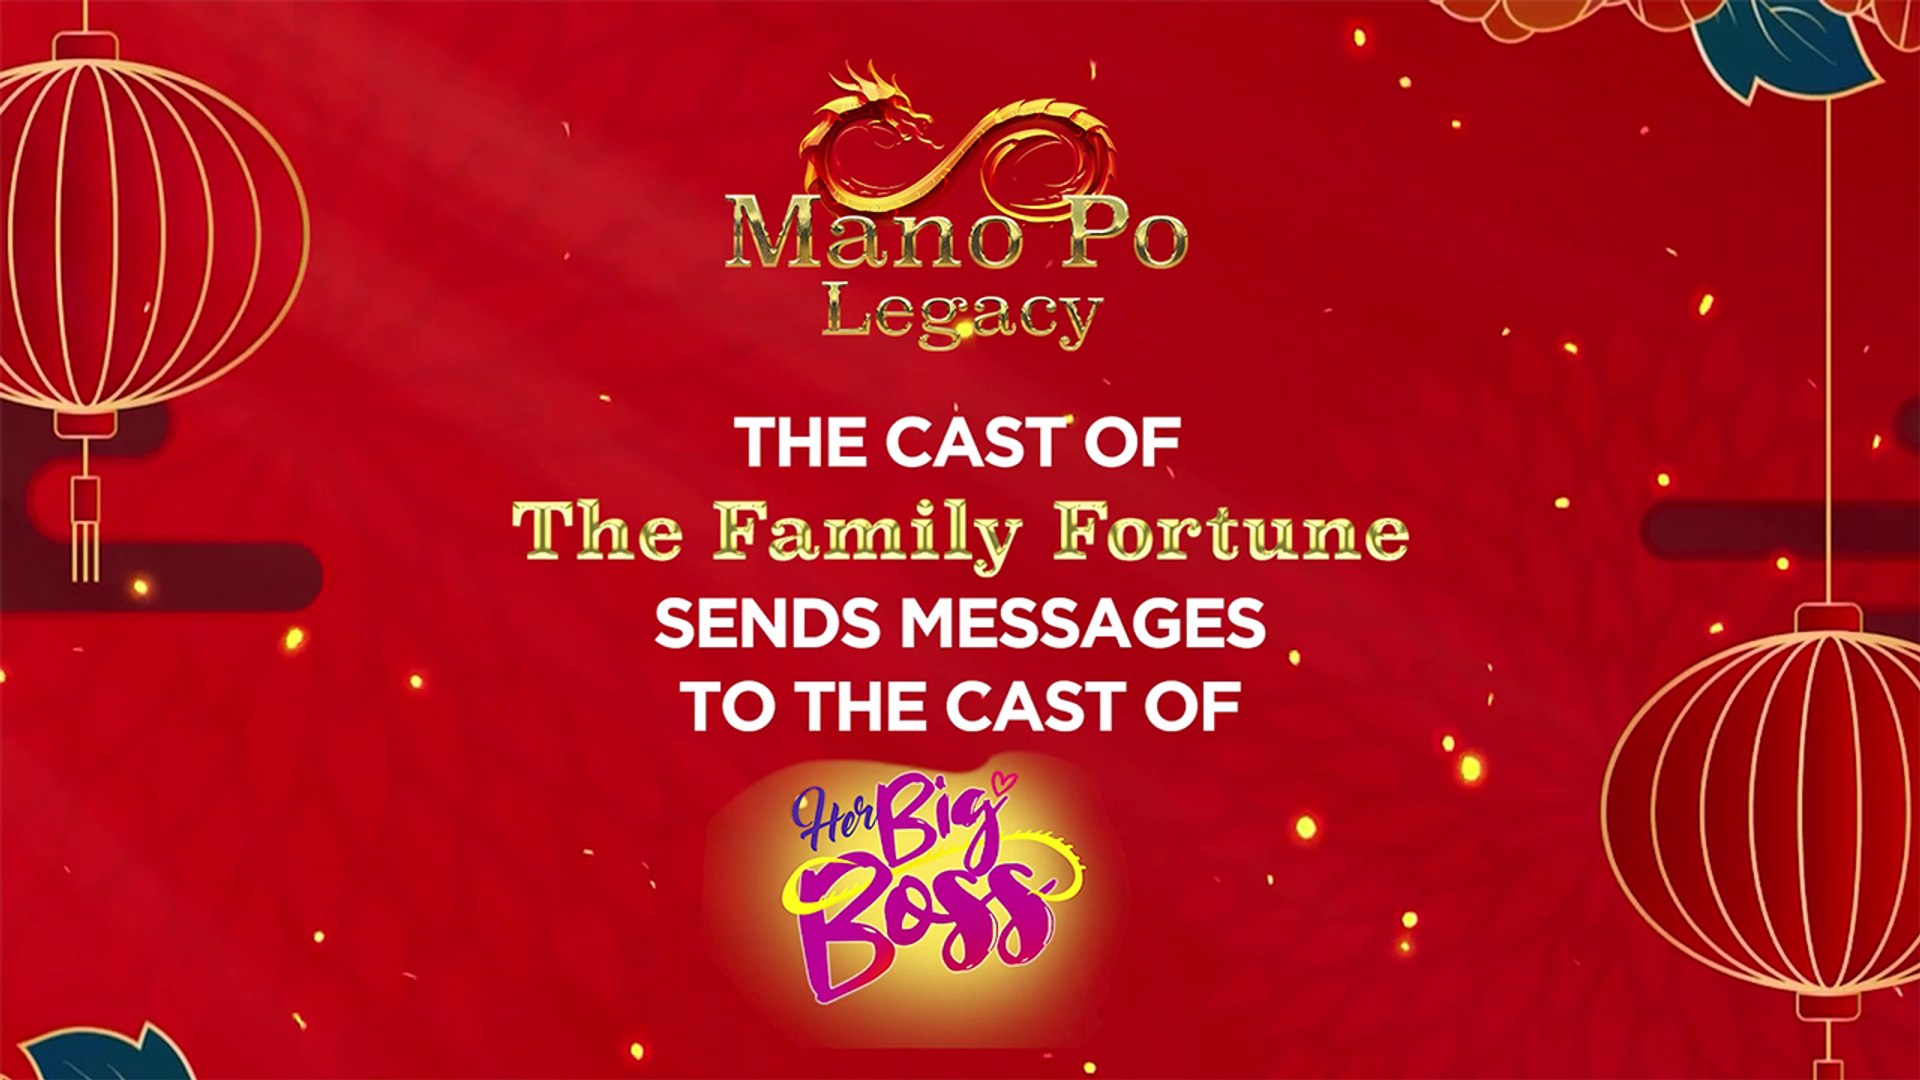 Mano Po Legacy The Family Fortune cast sends messages to Her Big Boss cast Online Exclusive